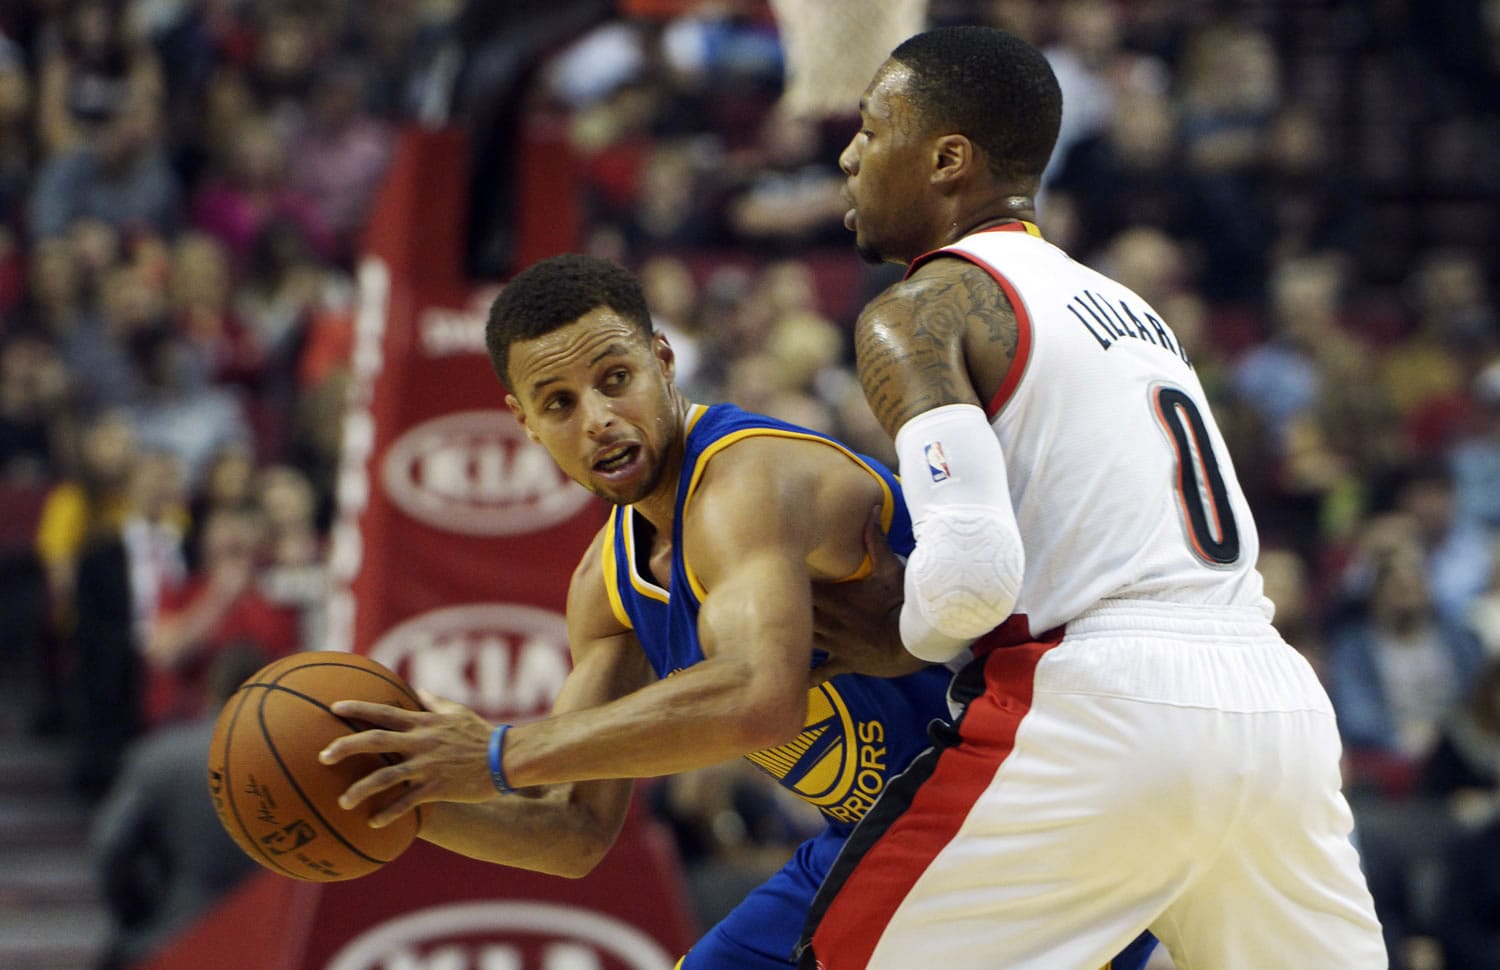 Golden State Warriors guard Stephen Curry, left, looks to pass the ball as Portland Trail Blazers guard Damian Lillard (0) defends during the first quarter of an NBA basketball game in Portland, Ore., Thursday, Oct. 8, 2015.